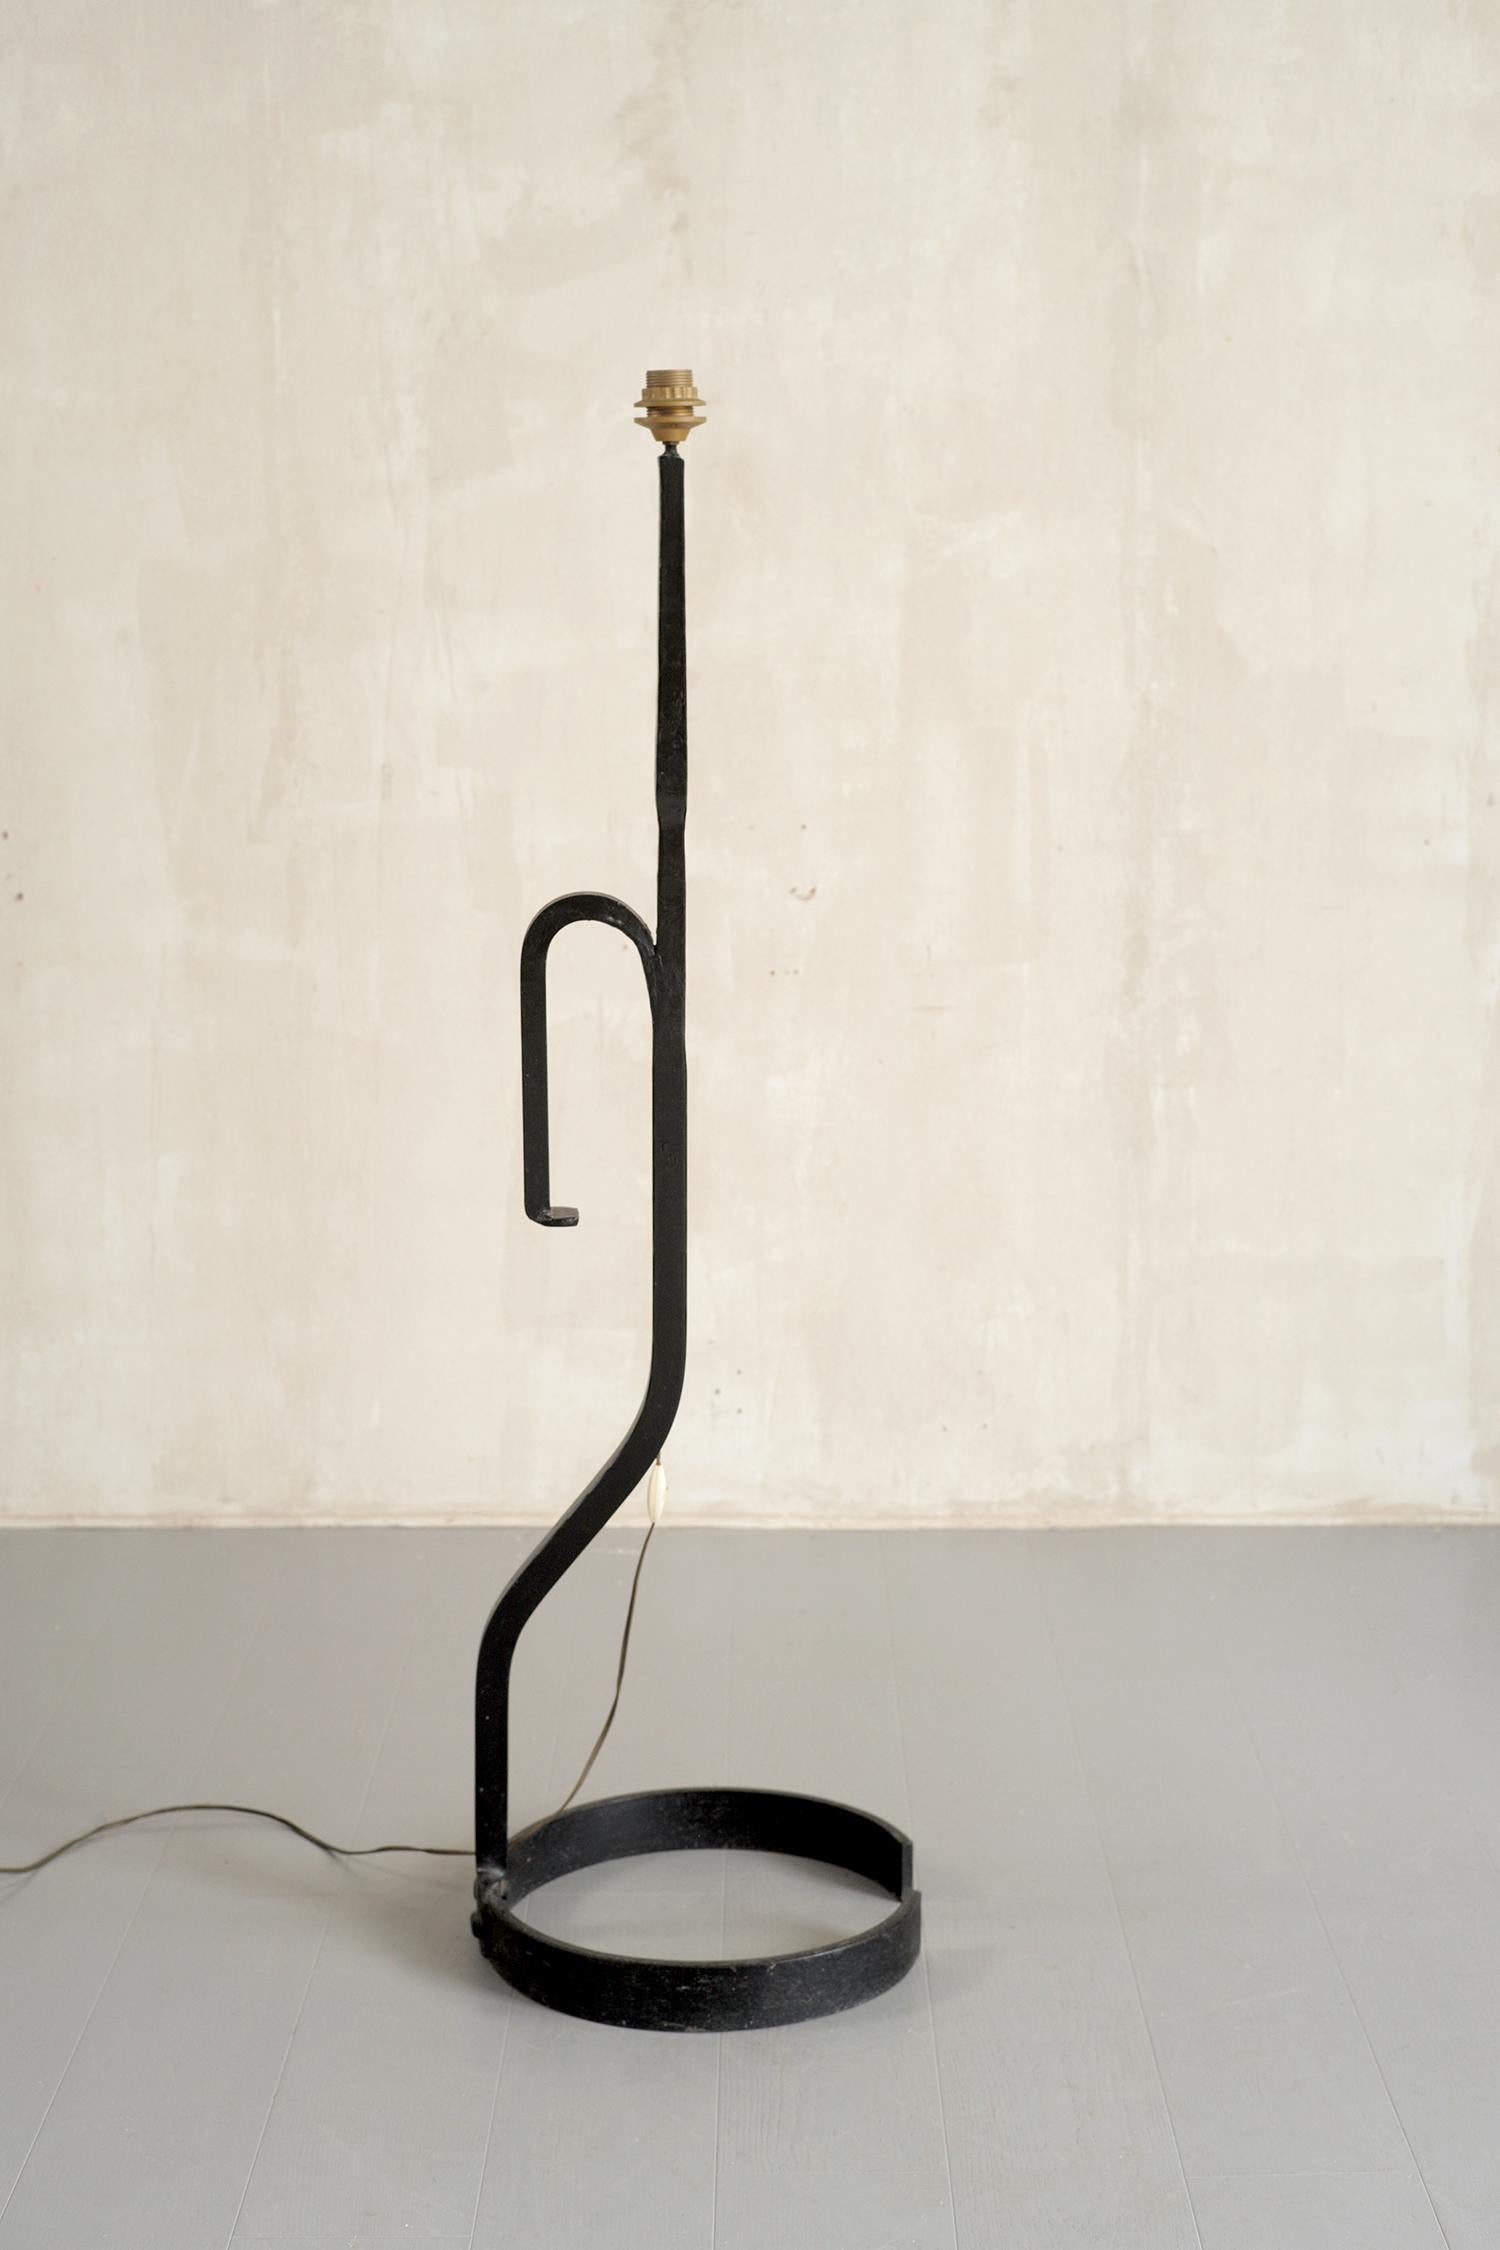 French Modernist Floor Lamp in Wrought Iron, France, 1960 For Sale